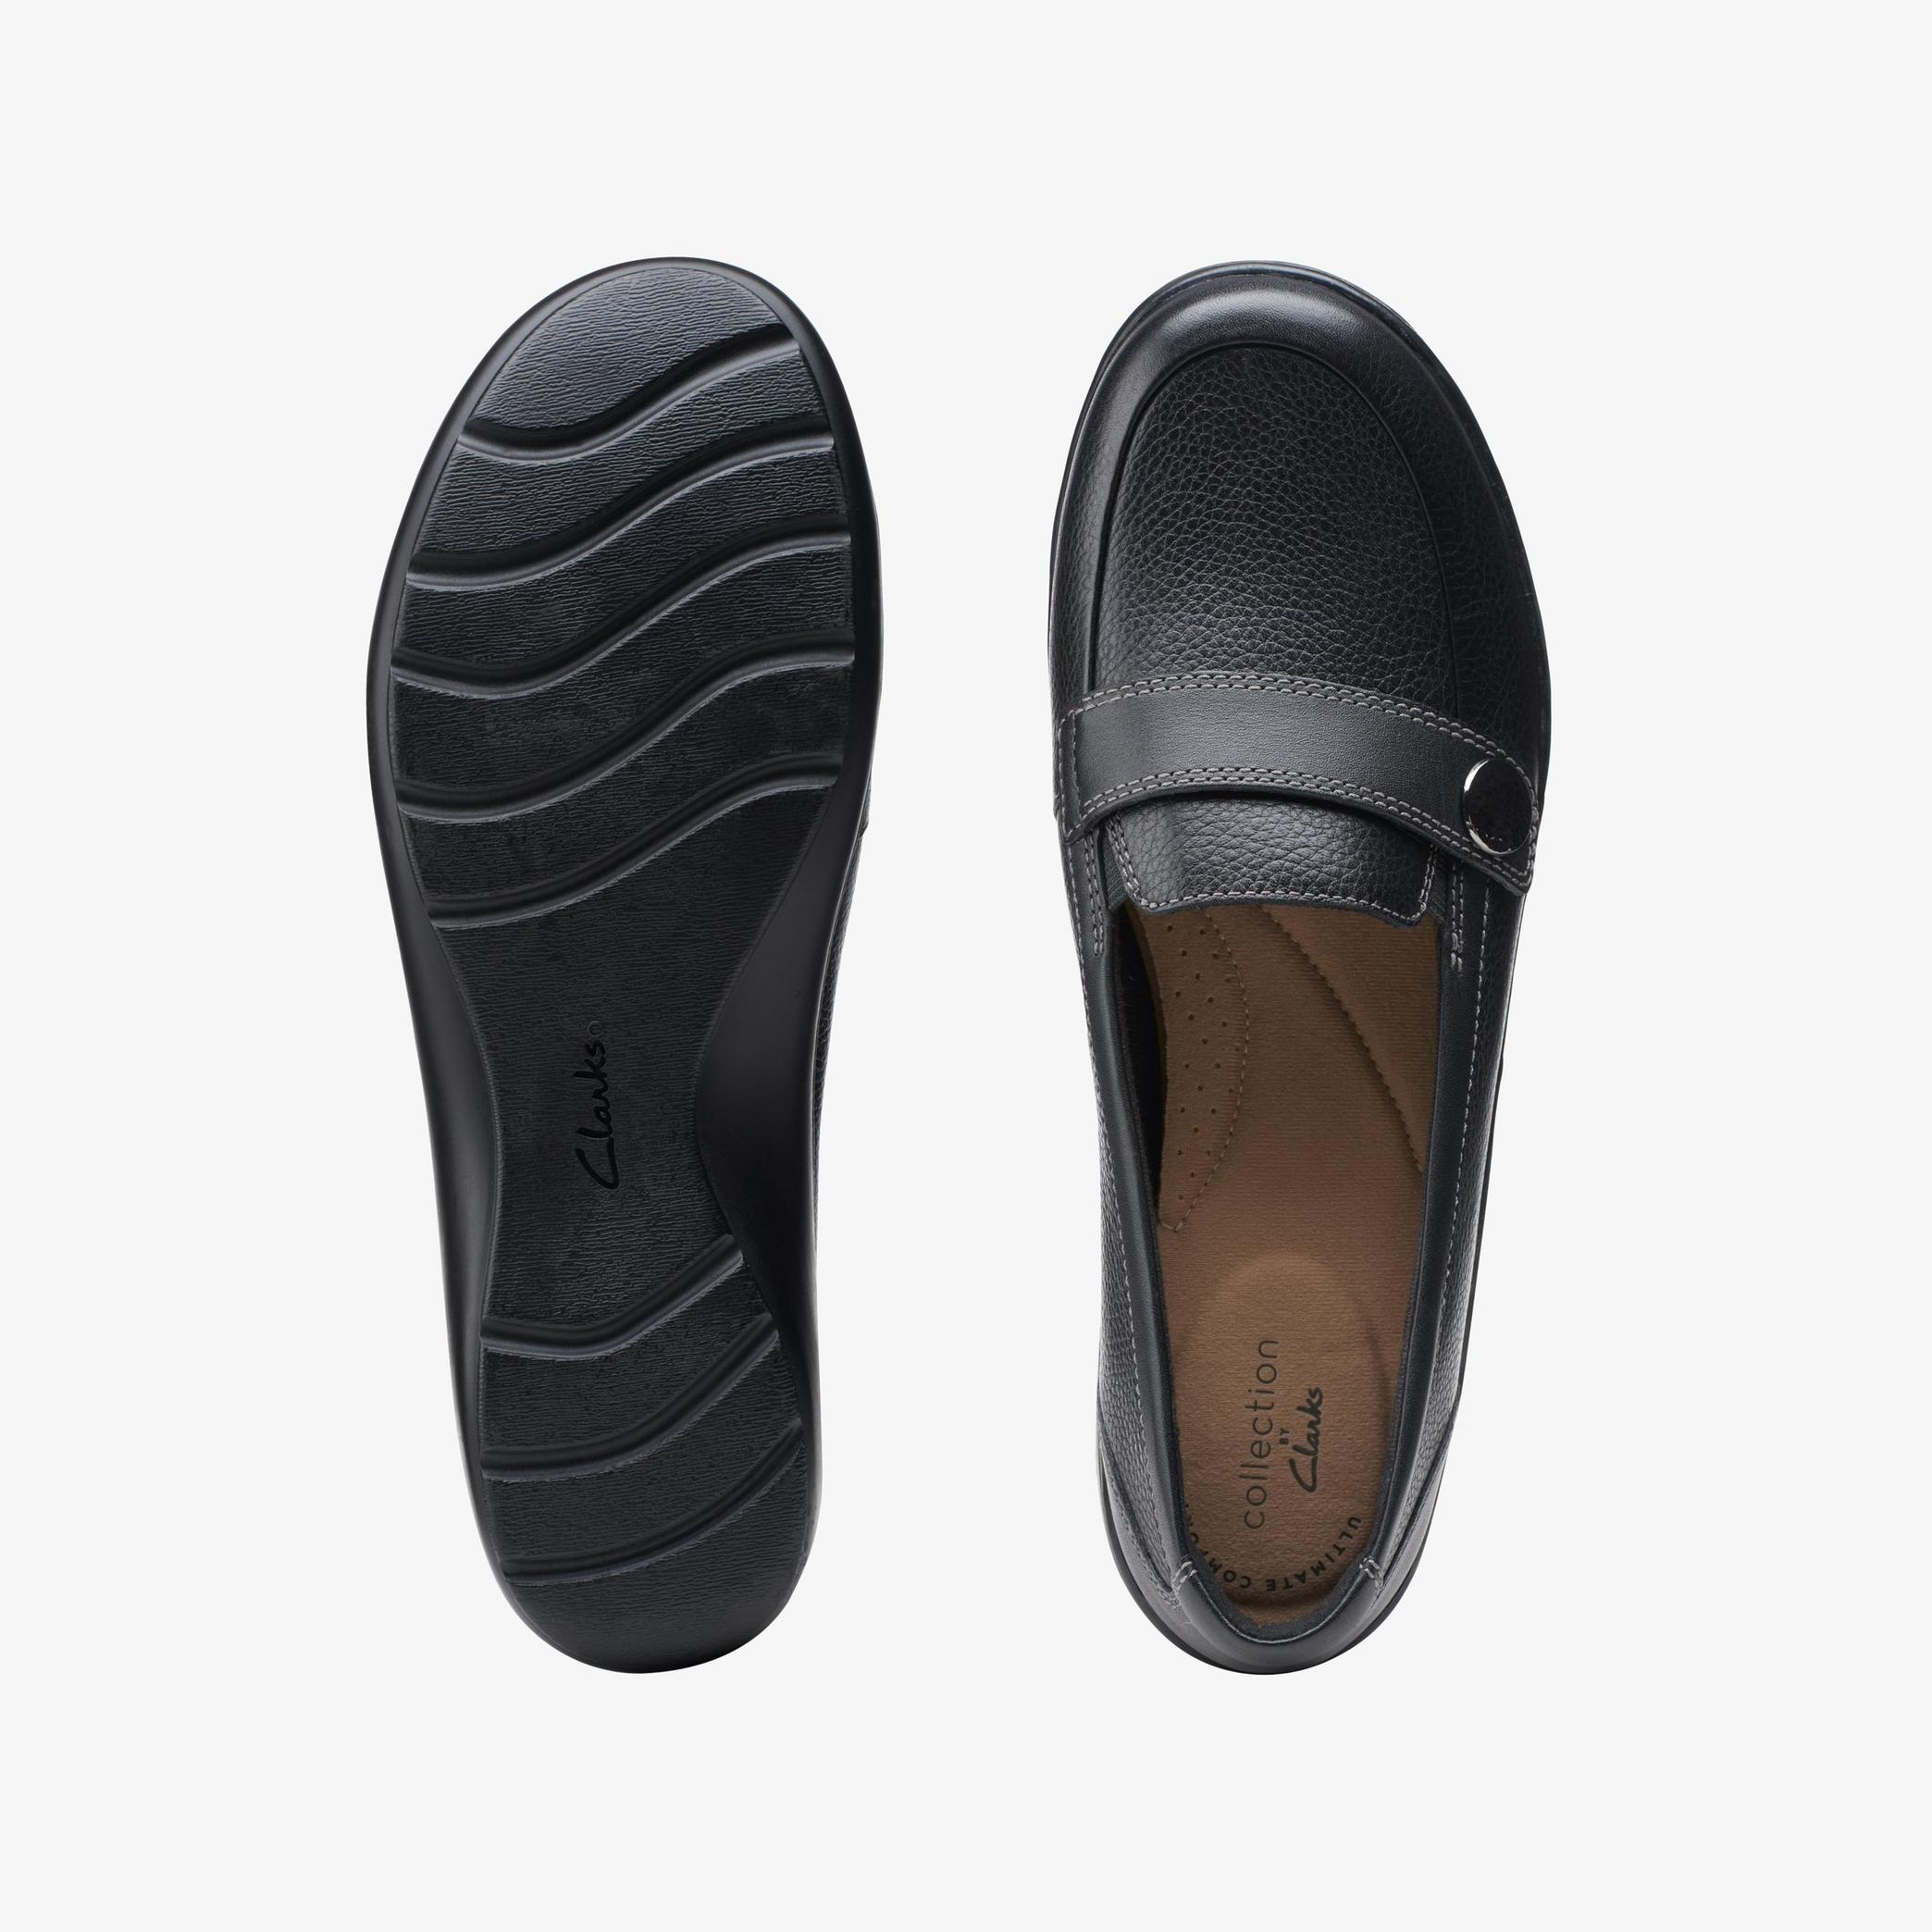 Cora Daisy Black Tumbled Loafers, view 6 of 6